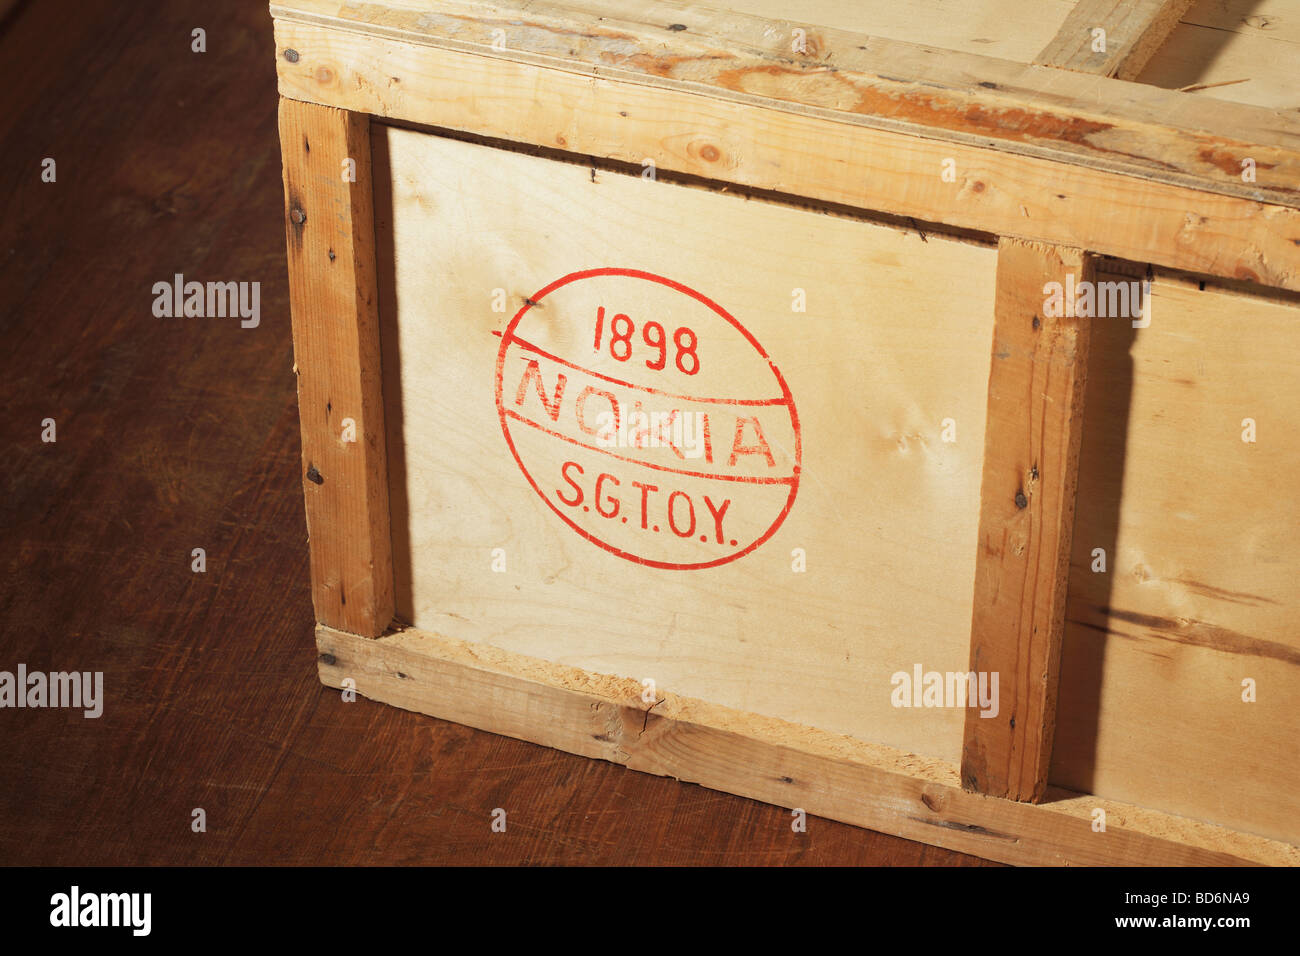 Wooden crate with old Nokia logo Stock Photo